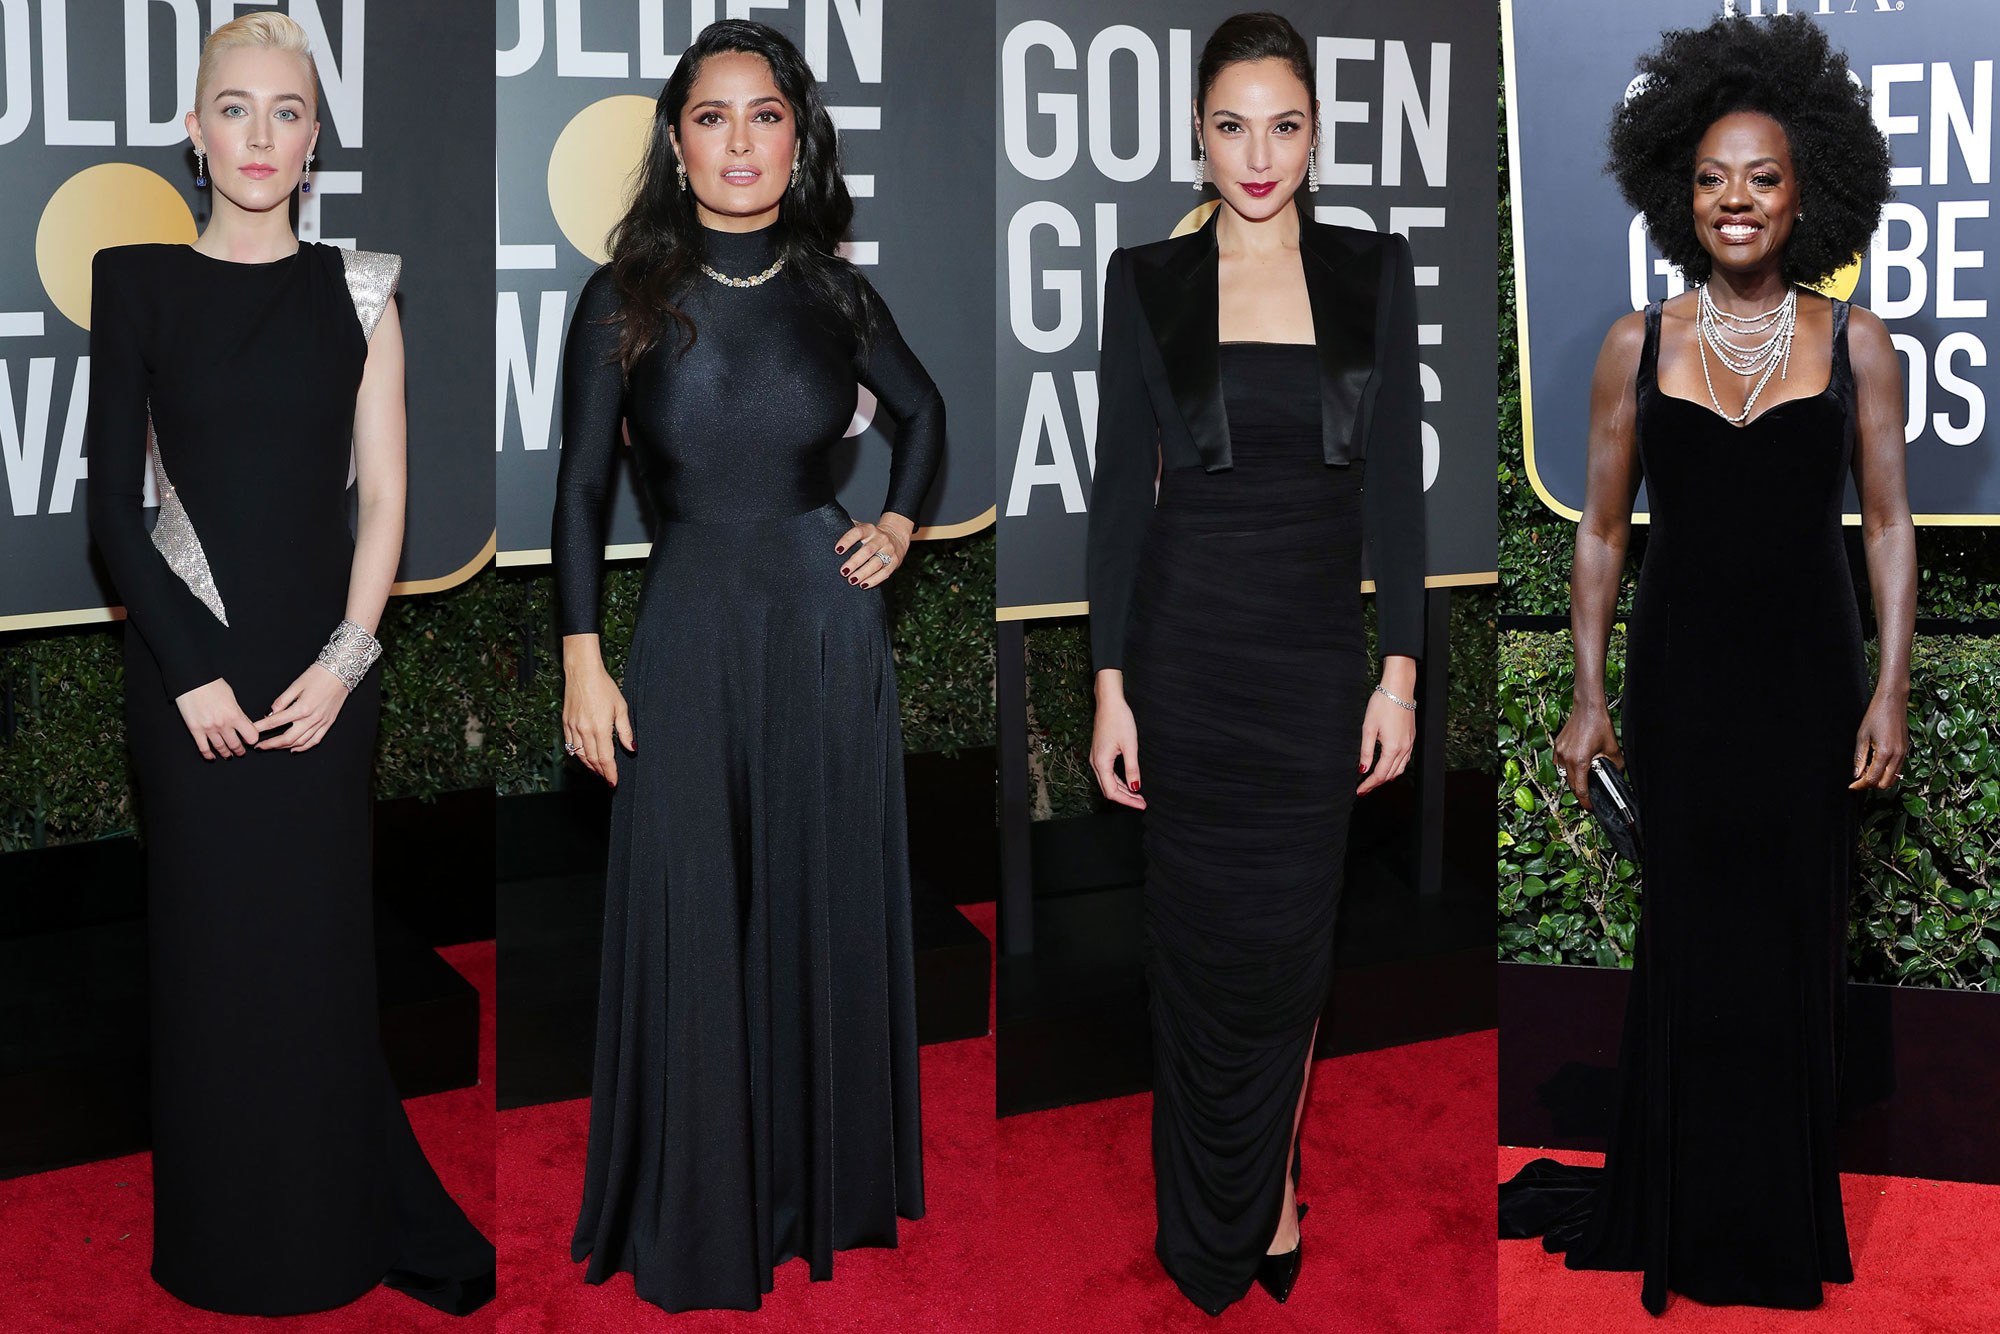 All the 2018 Golden Globes Red Carpet Looks Photos | Vanity Fair